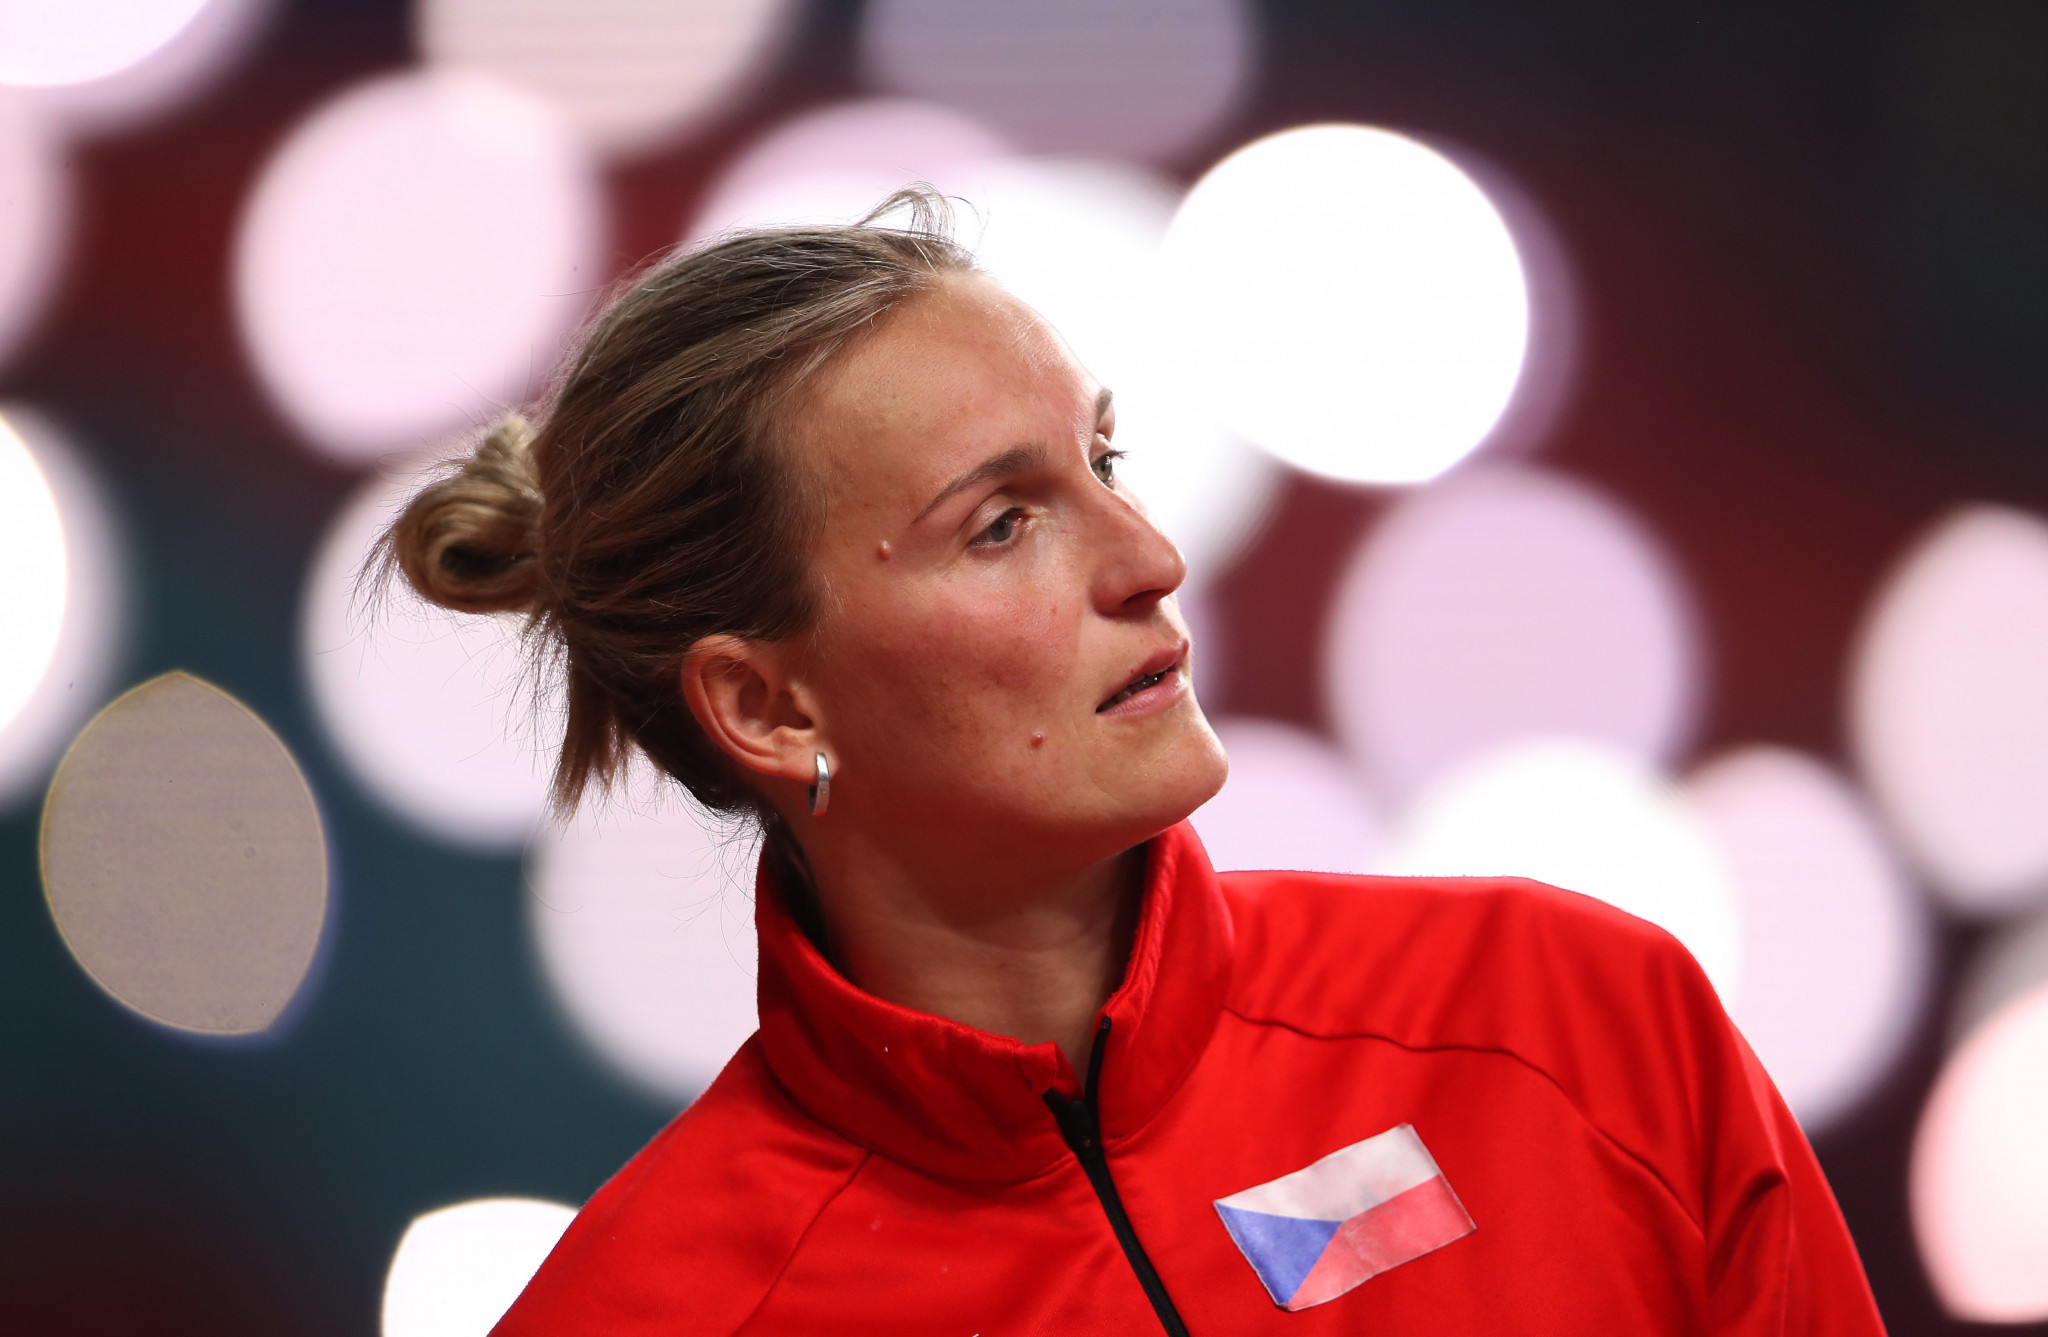 Barbora Špotáková will decide whether to compete at the rescheduled Tokyo 2020 Olympic Games later this year ©Getty Images